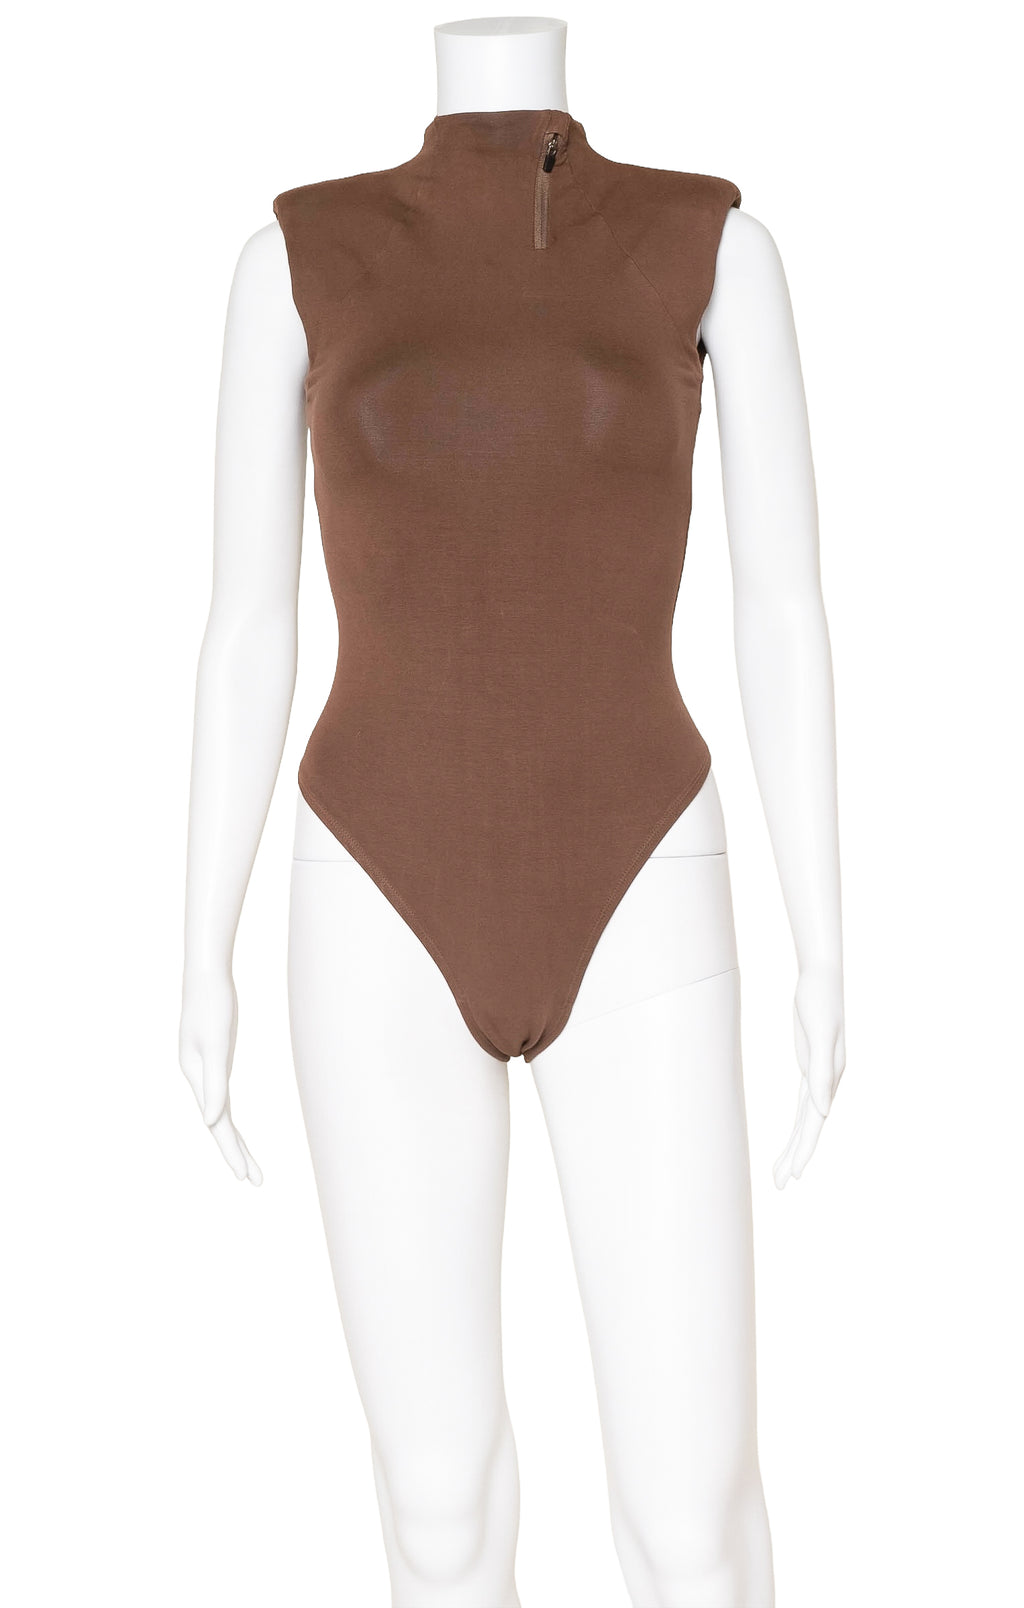 ENTIRE STUDIOS (RARE) Bodysuit Size: No size tags, fits like XS/S